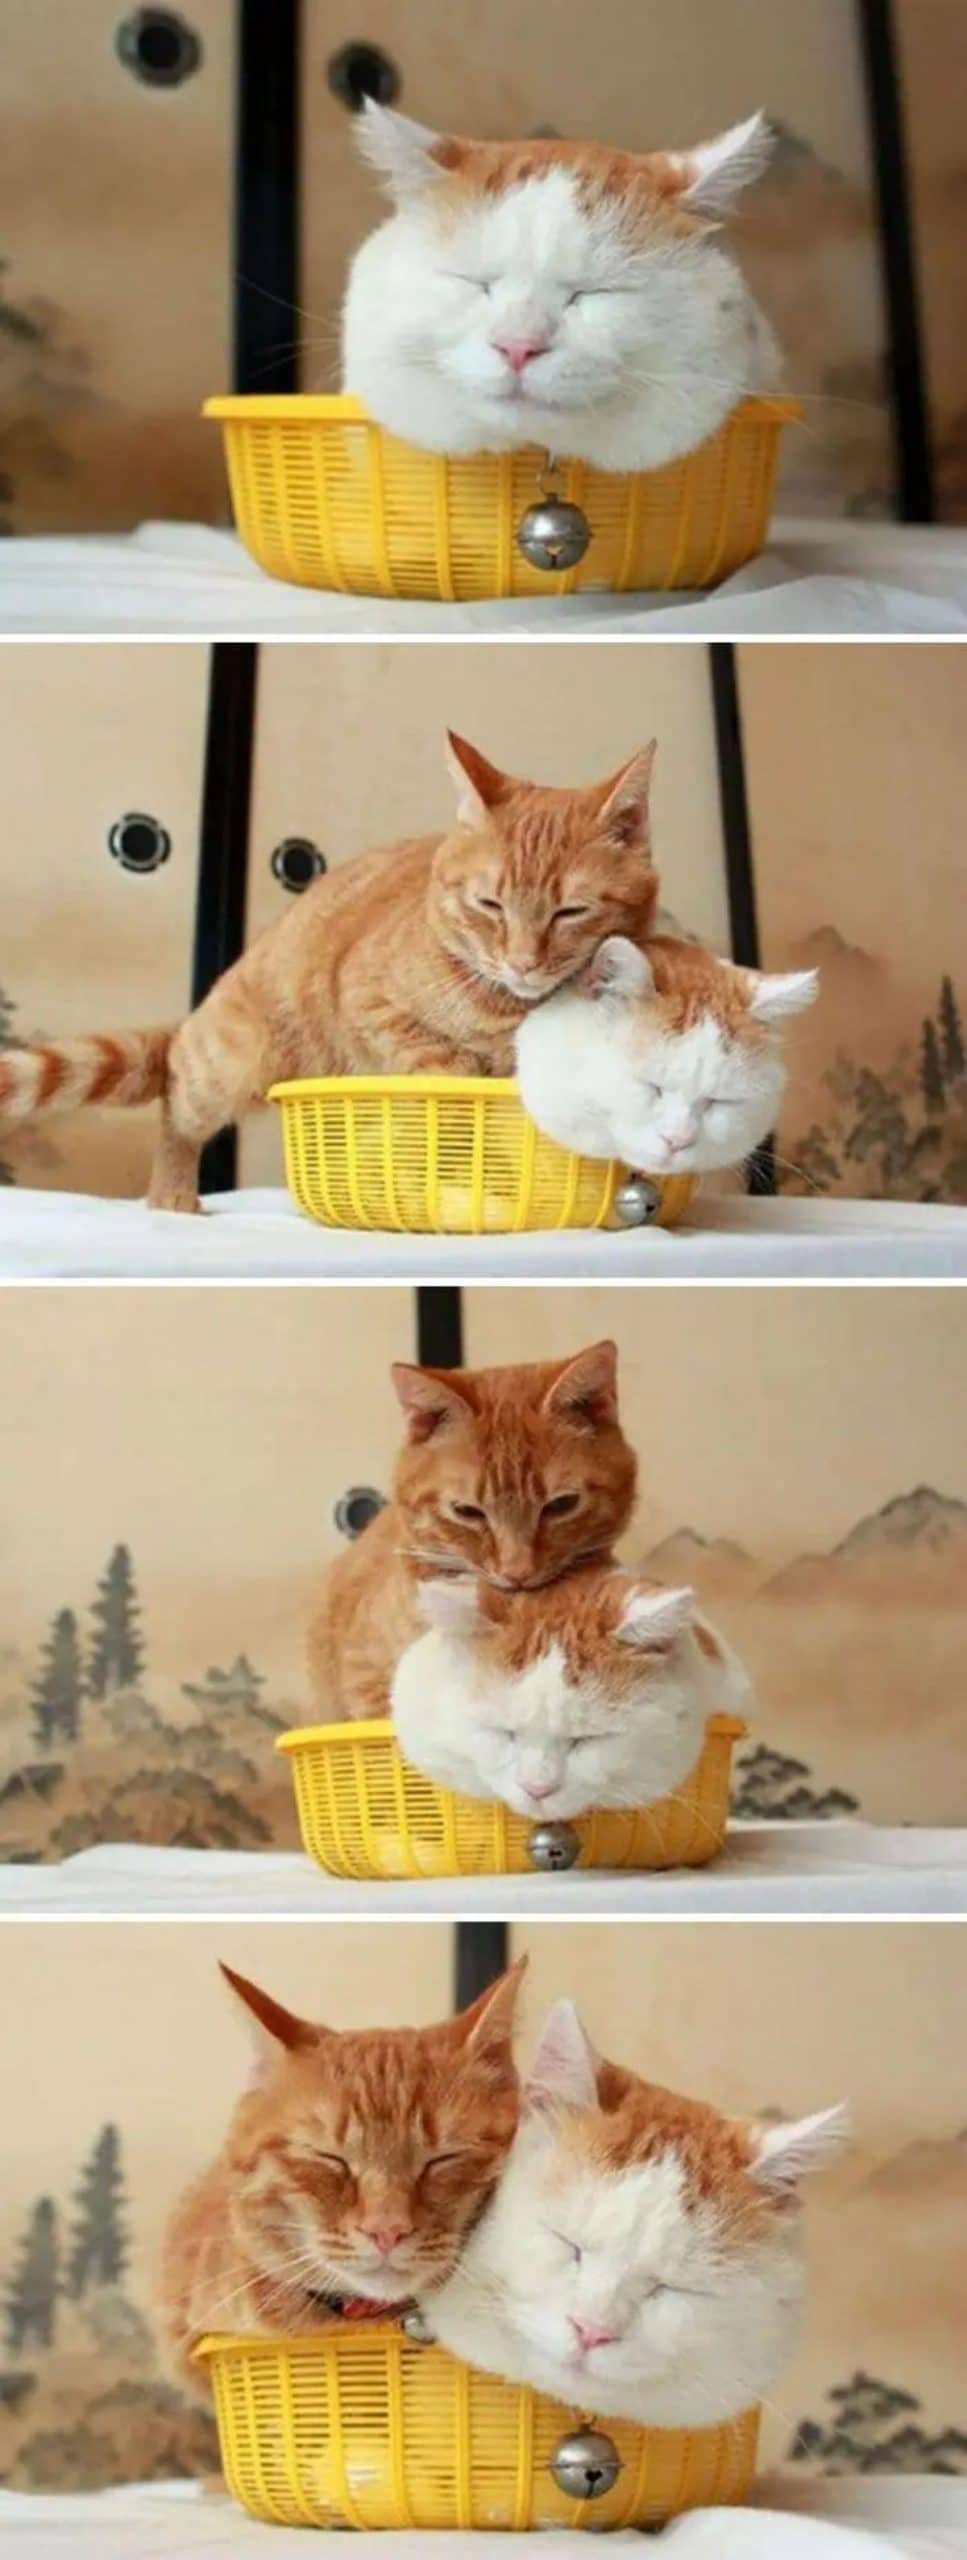 4 photos of an orange and white cat laying ina yellow container turned upside down and an orange cat joining him